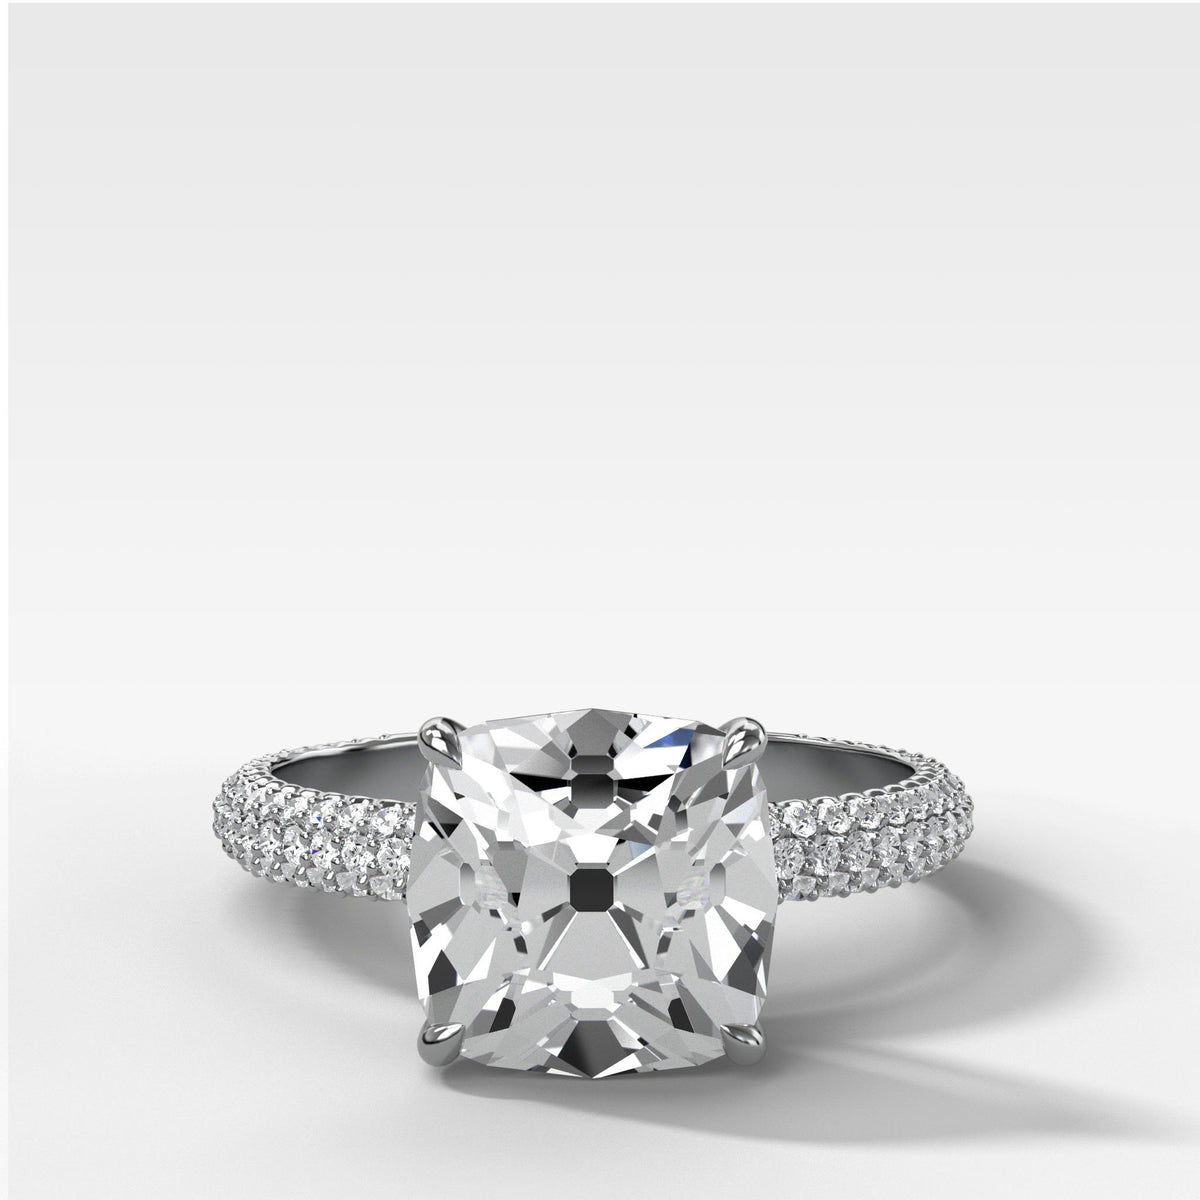 Triple Row Pavé Engagement Ring With Old Mine Cut by Good Stone in White Gold